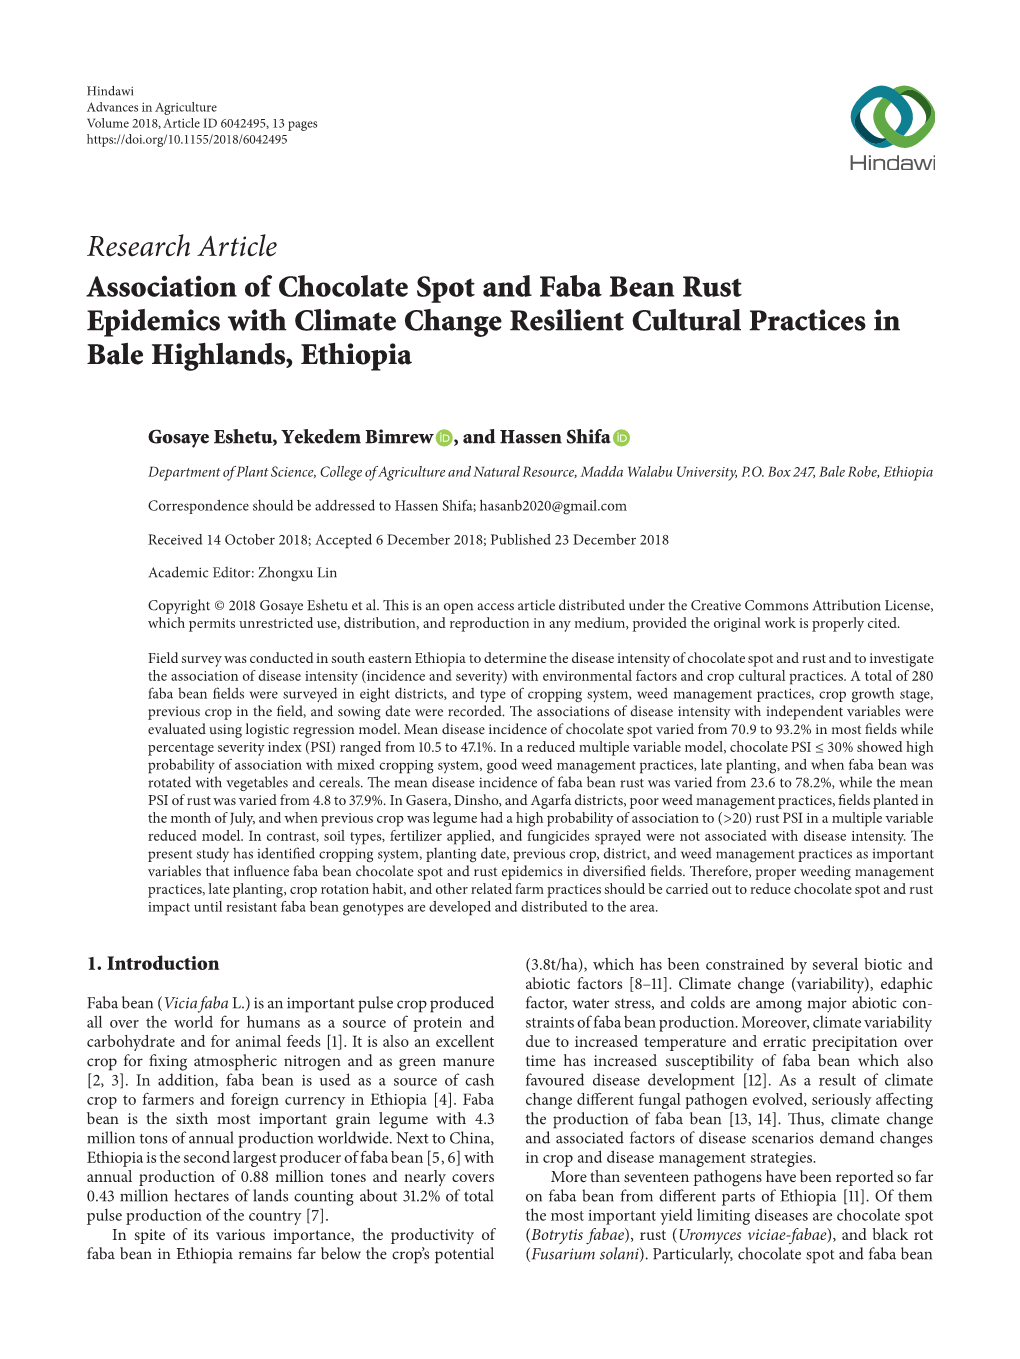 Research Article Association of Chocolate Spot and Faba Bean Rust Epidemics with Climate Change Resilient Cultural Practices in Bale Highlands, Ethiopia